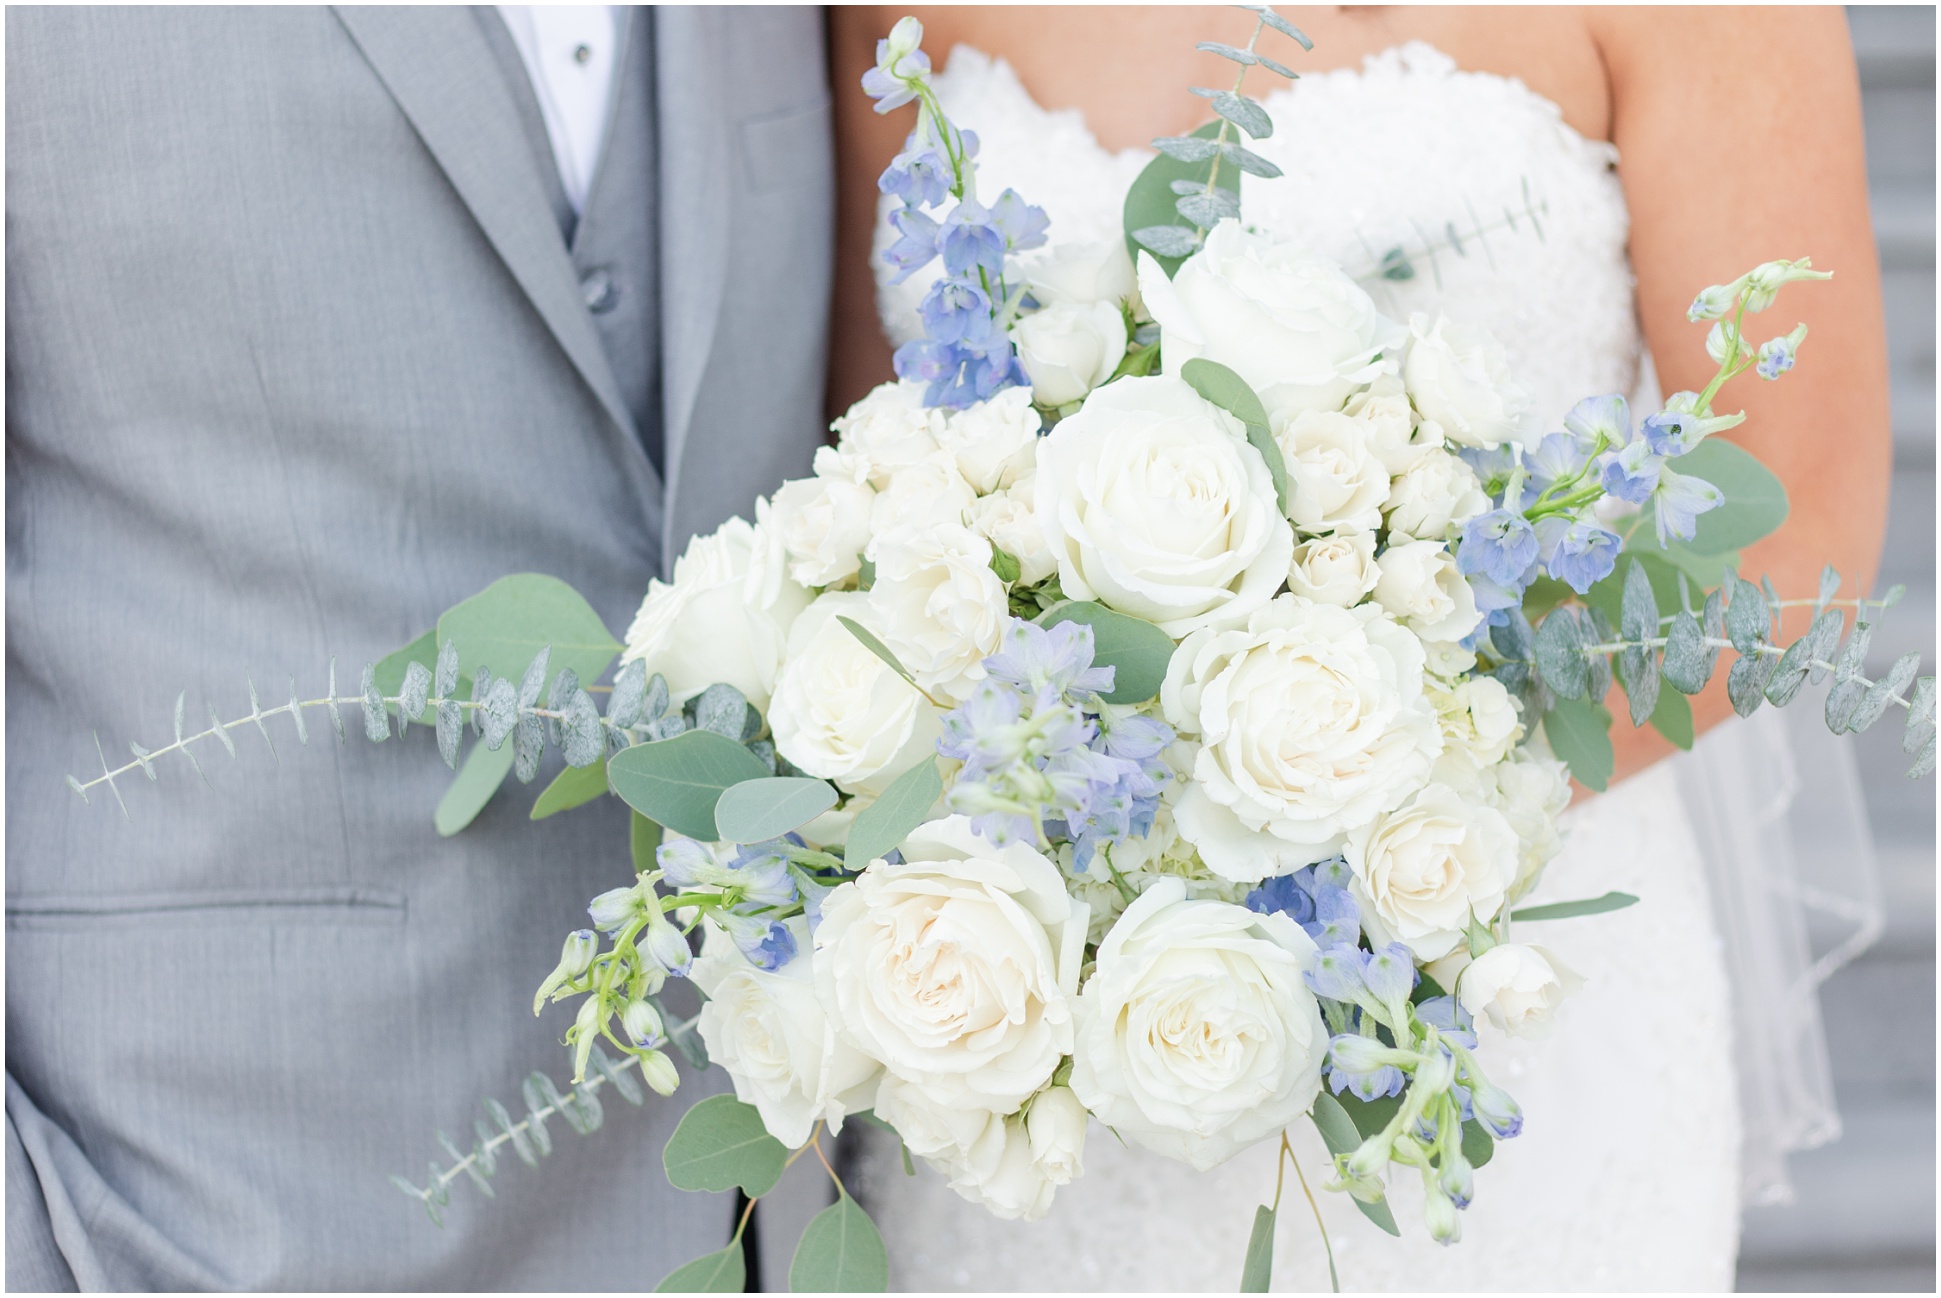 Horizontal Close up of bridal bouquet with white roses, sage stems, and blue snap dragons